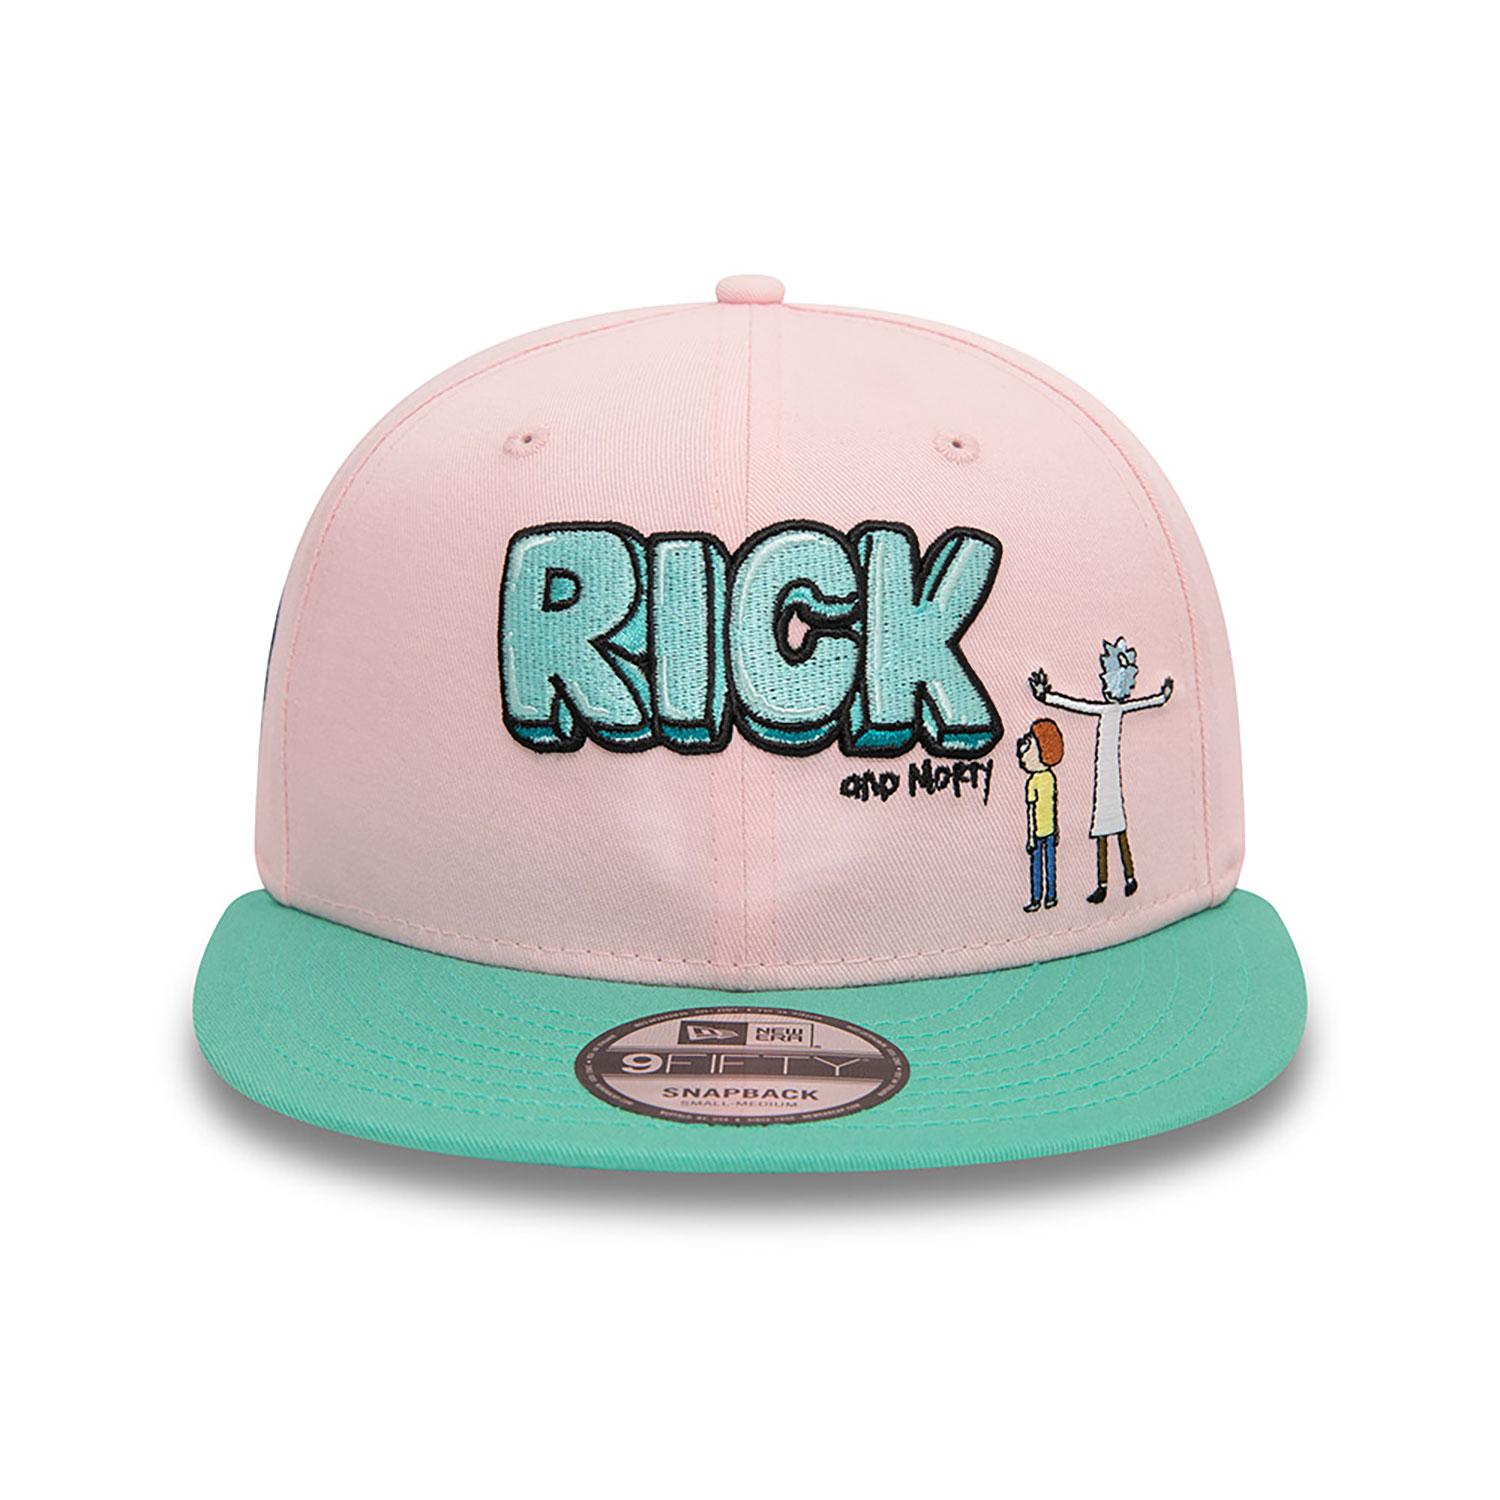 Rick And Morty Replacement Morty Pastel Pink 9FIFTY Snapback Cap